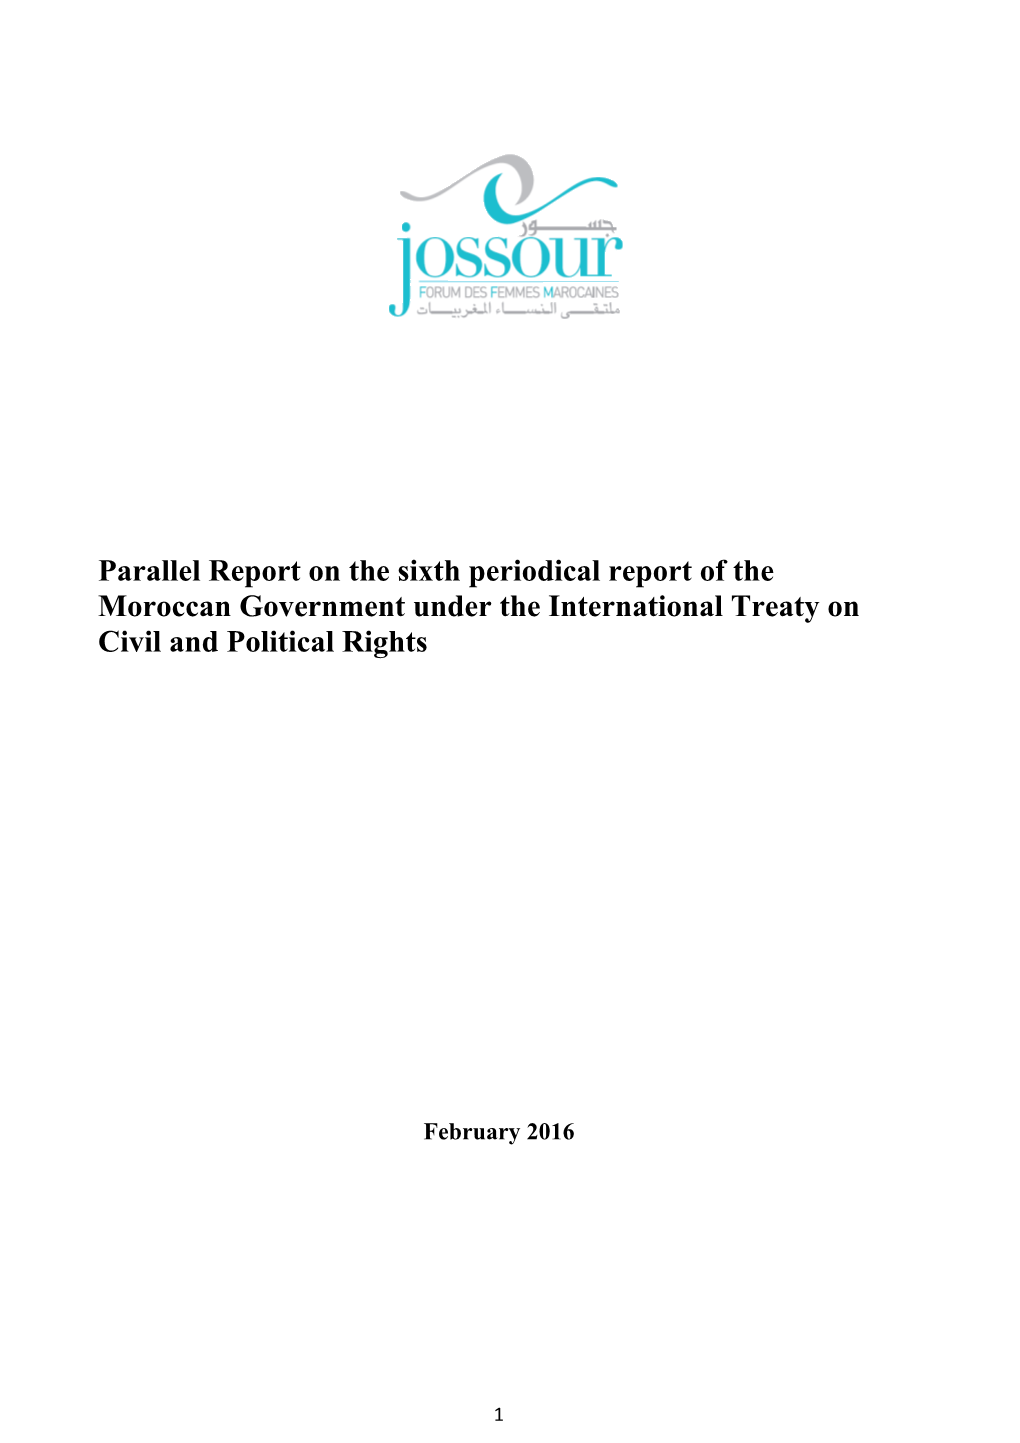 Parallel Report on the Sixth Periodical Report of the Moroccan Government Under The